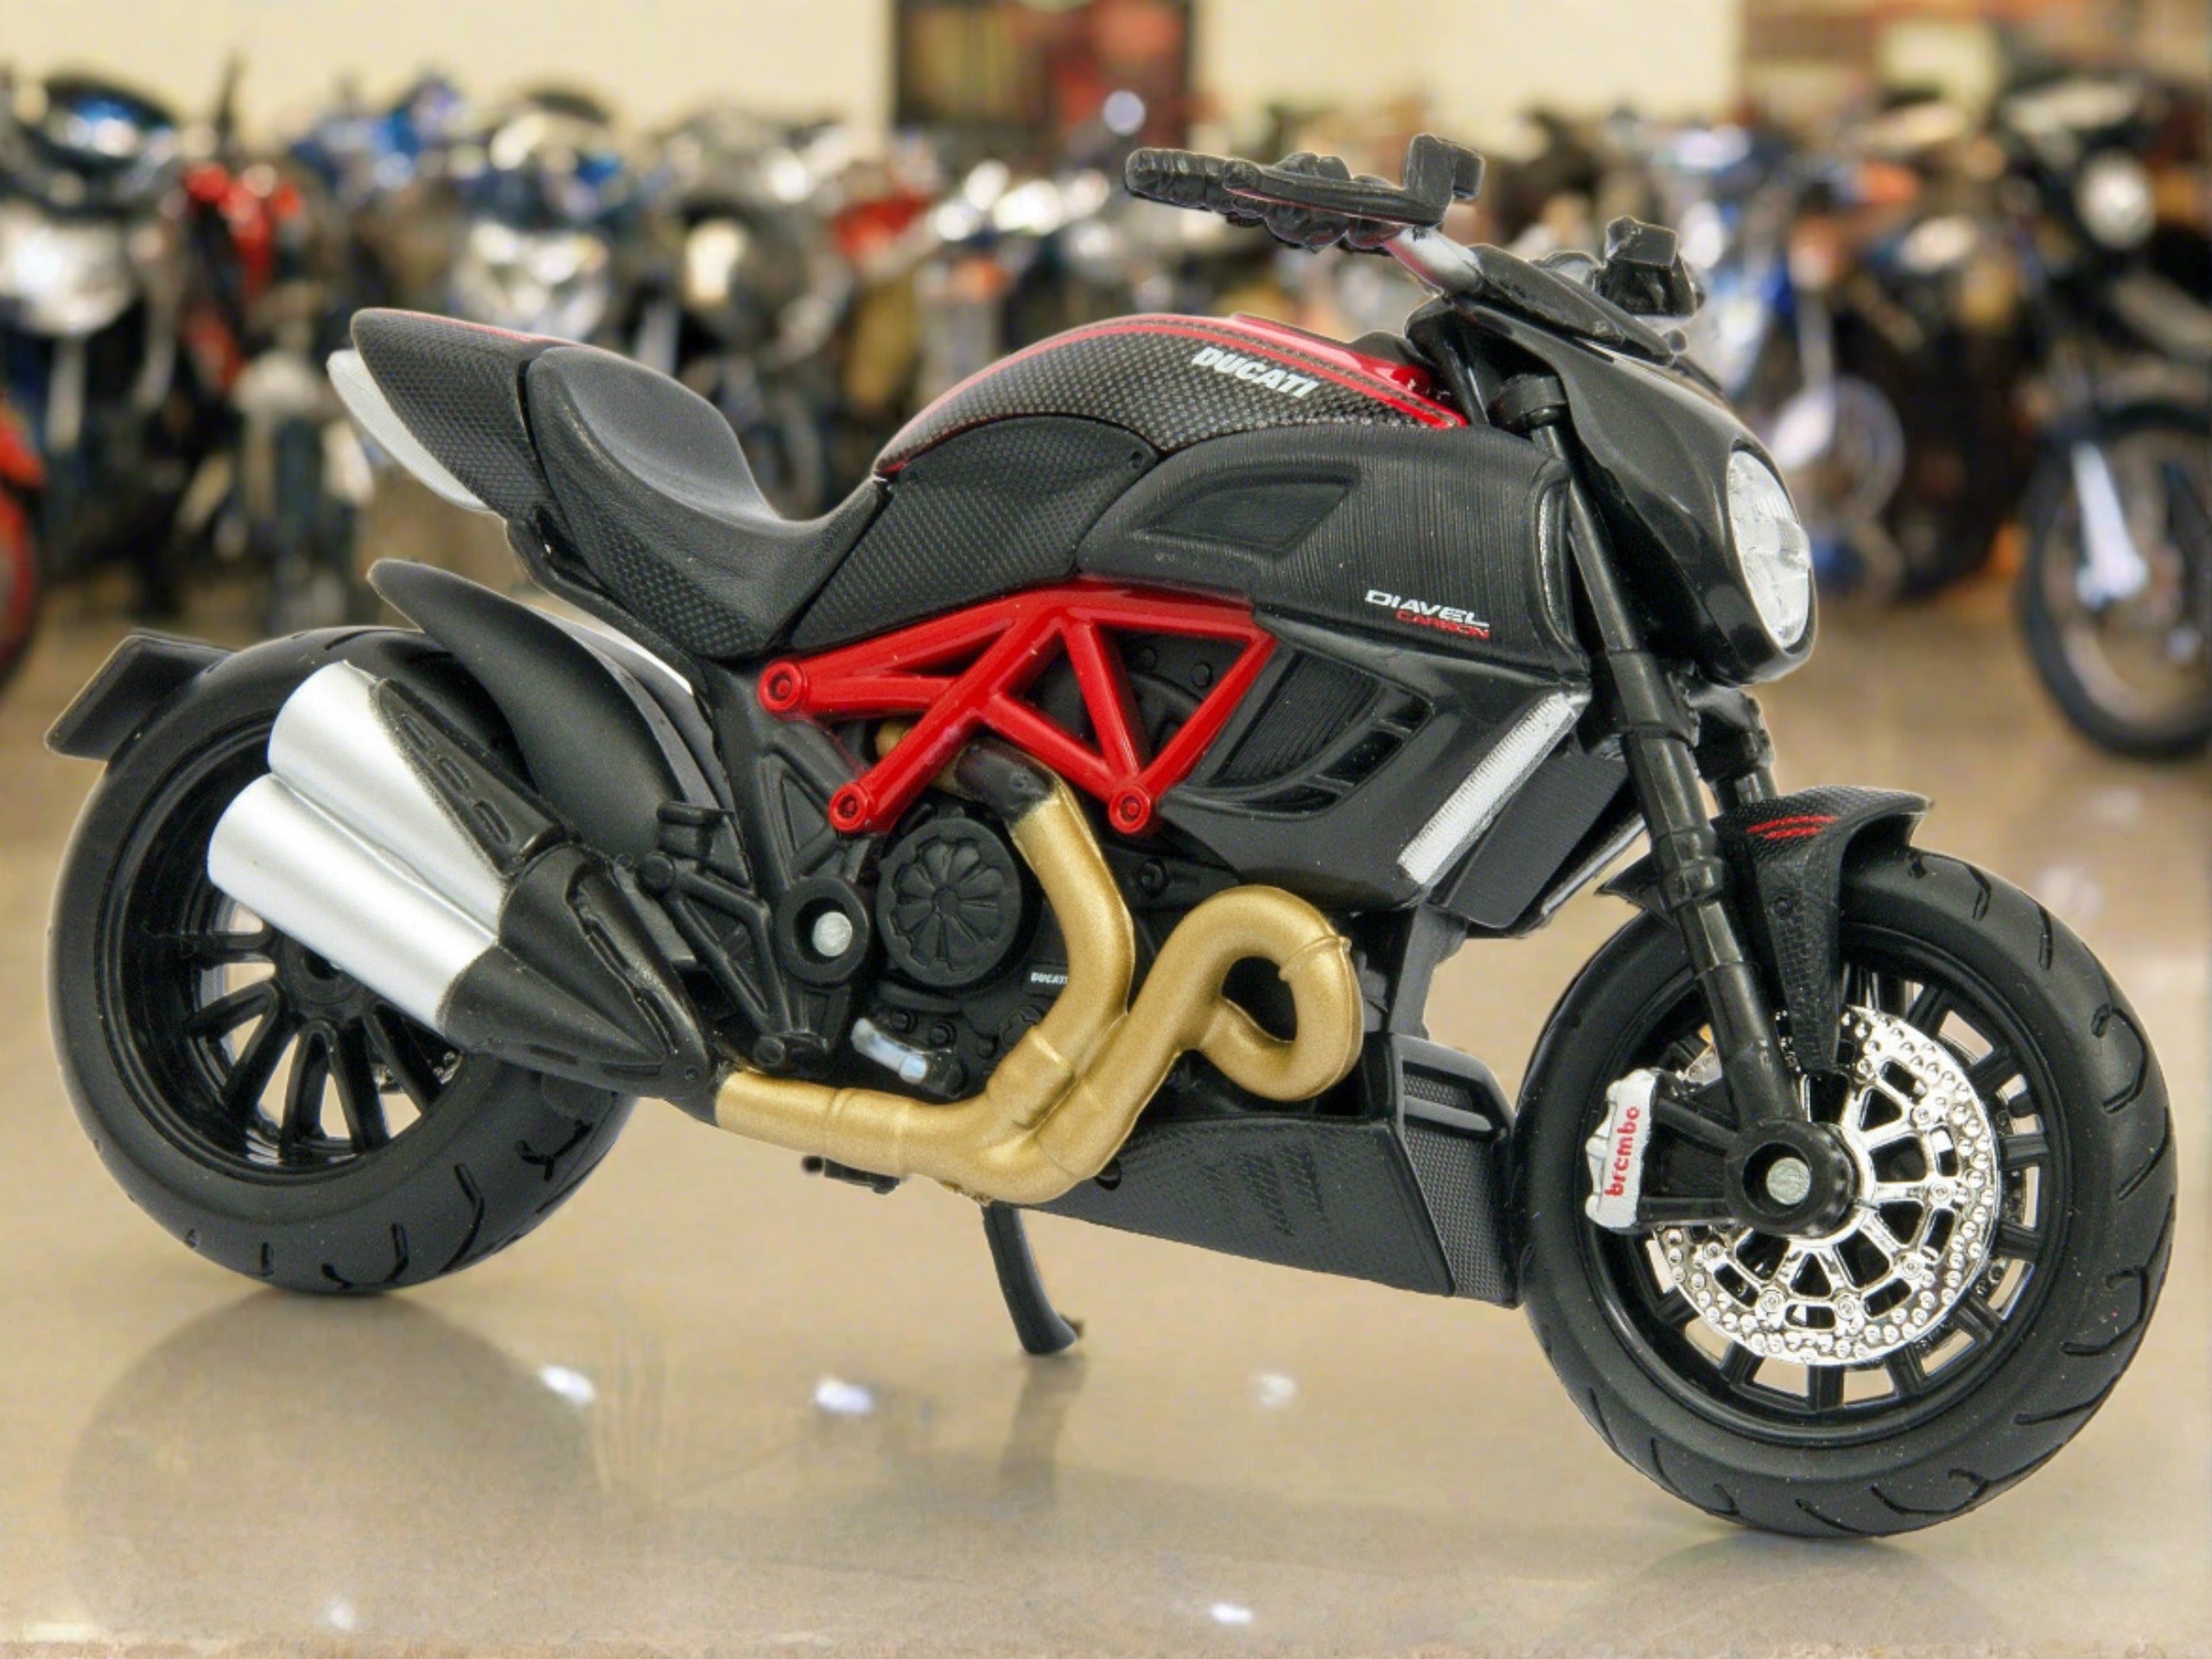 Ducati Diavel Carbon red/black - 1:18 Scale Diecast Model Motorcycle